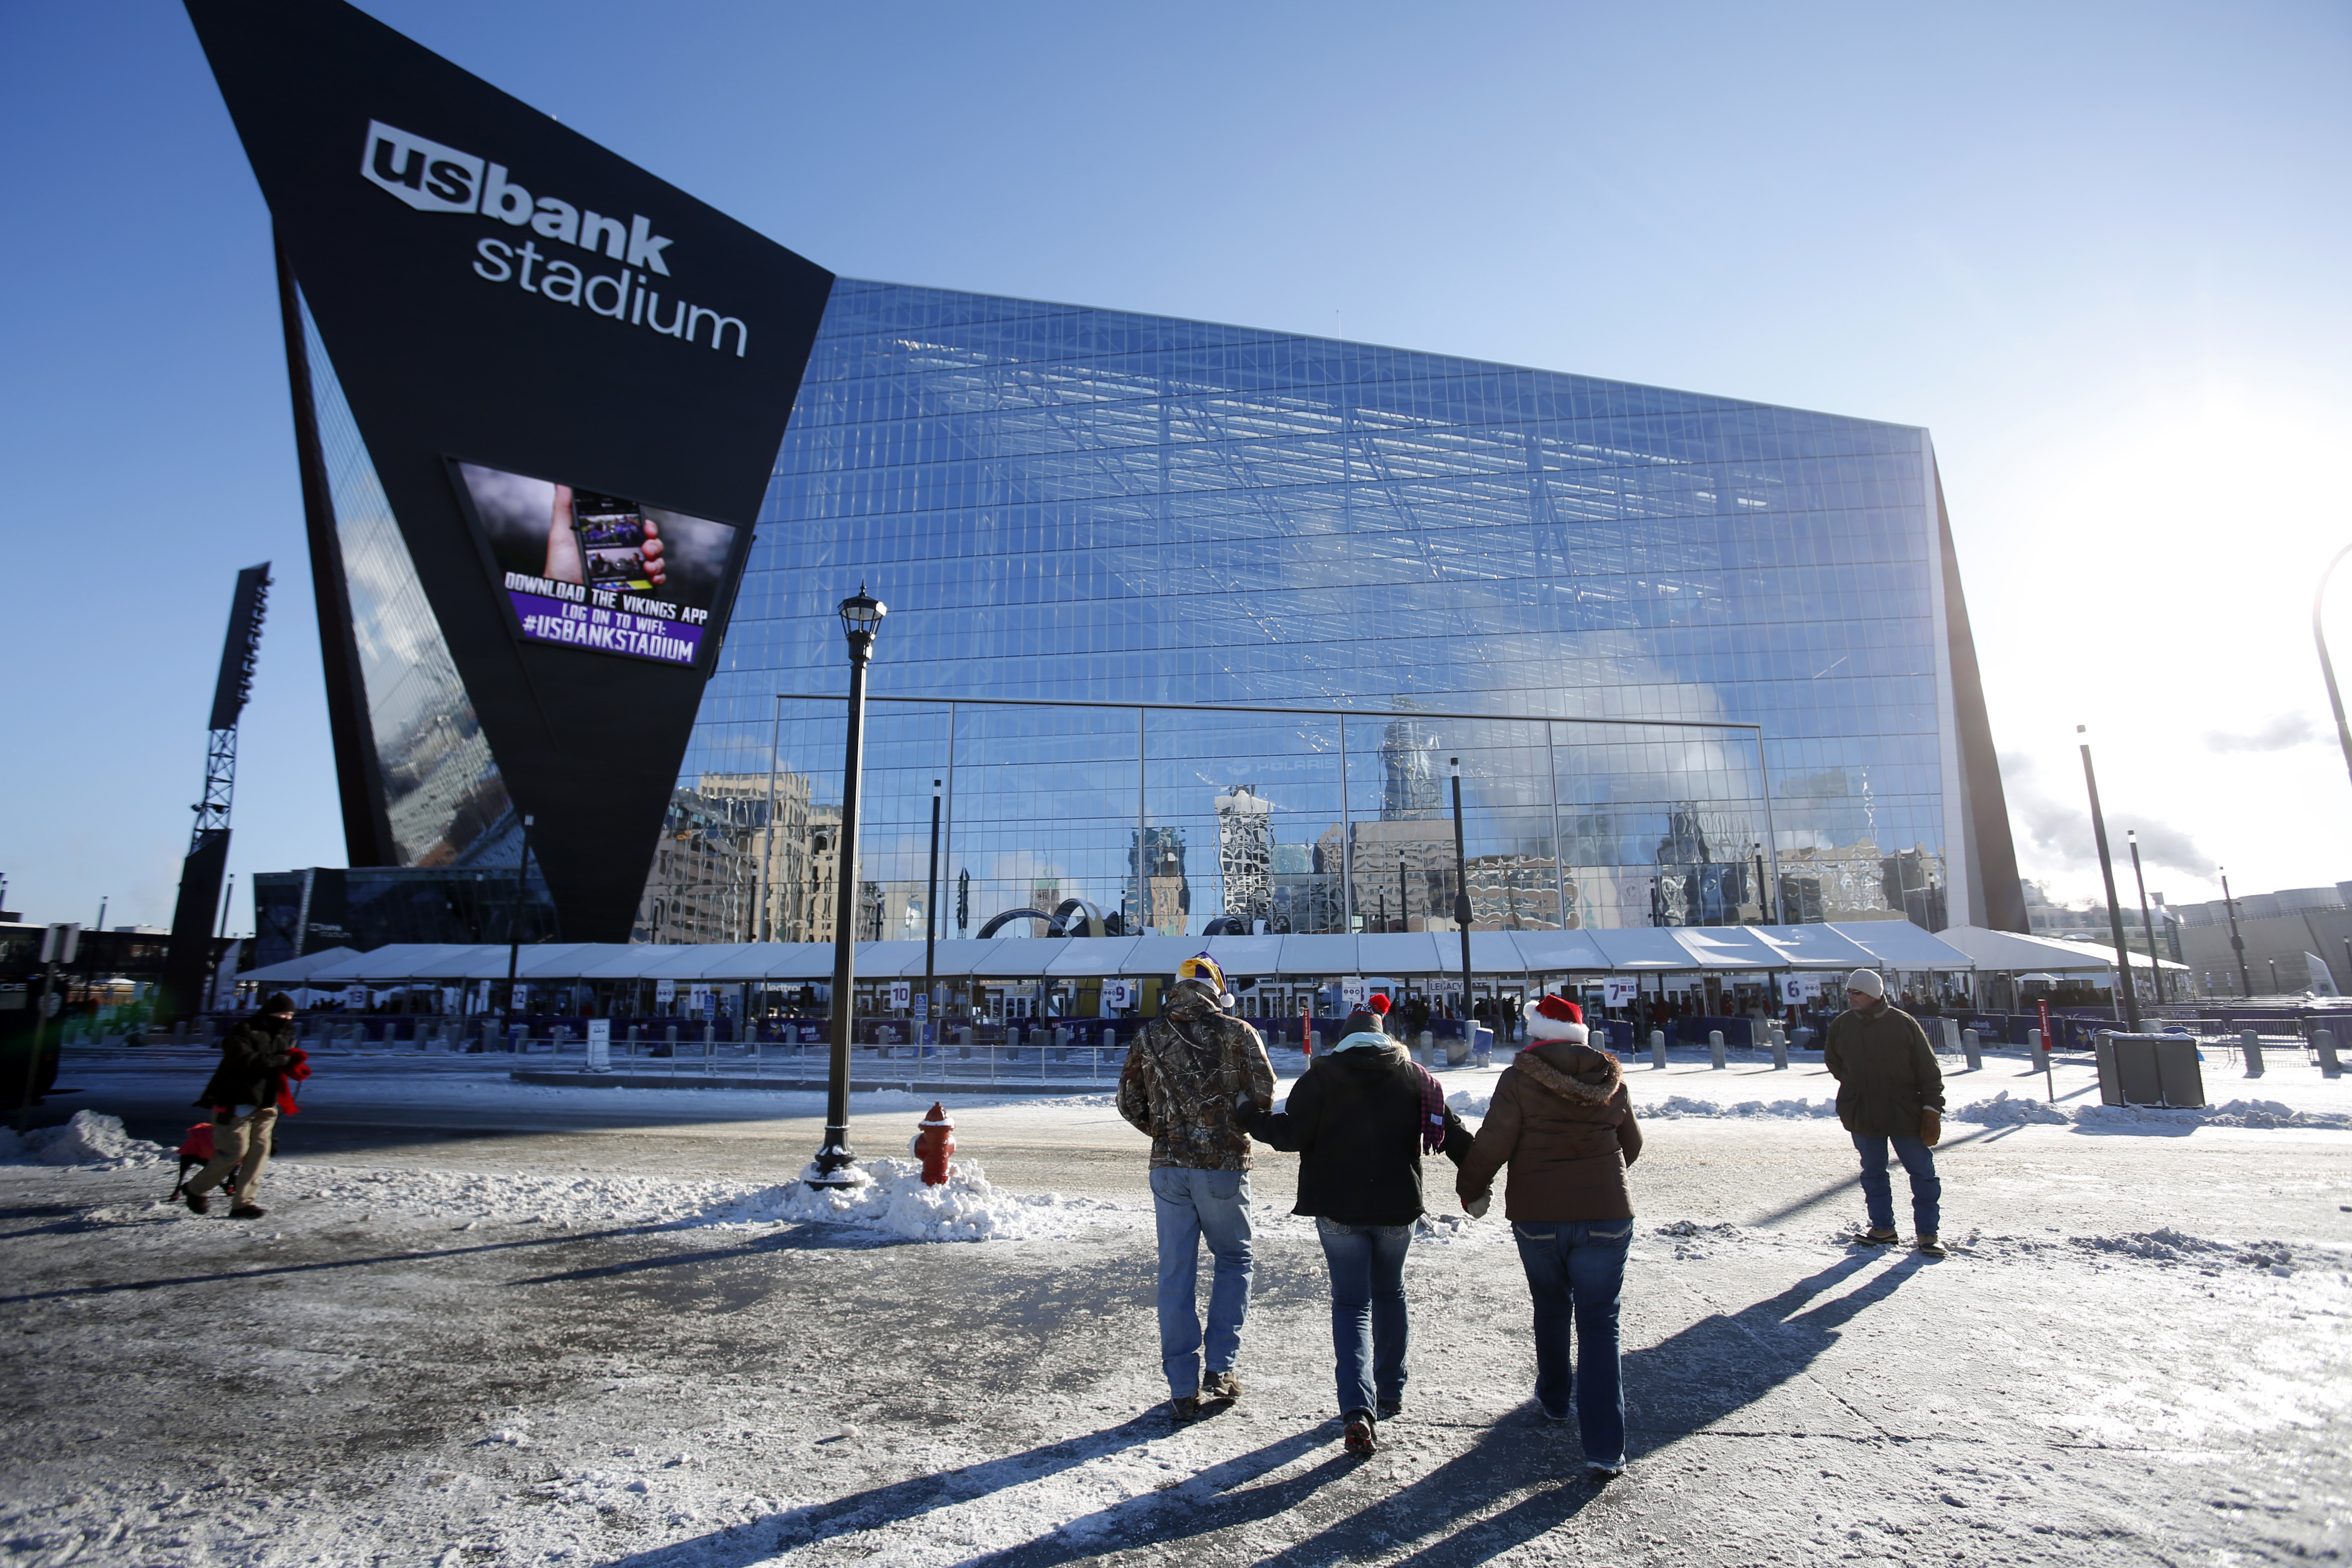 Fans walk to the Minnesota Vikings U.S. Bank Stadium before a game against the Indianapolis Colts.